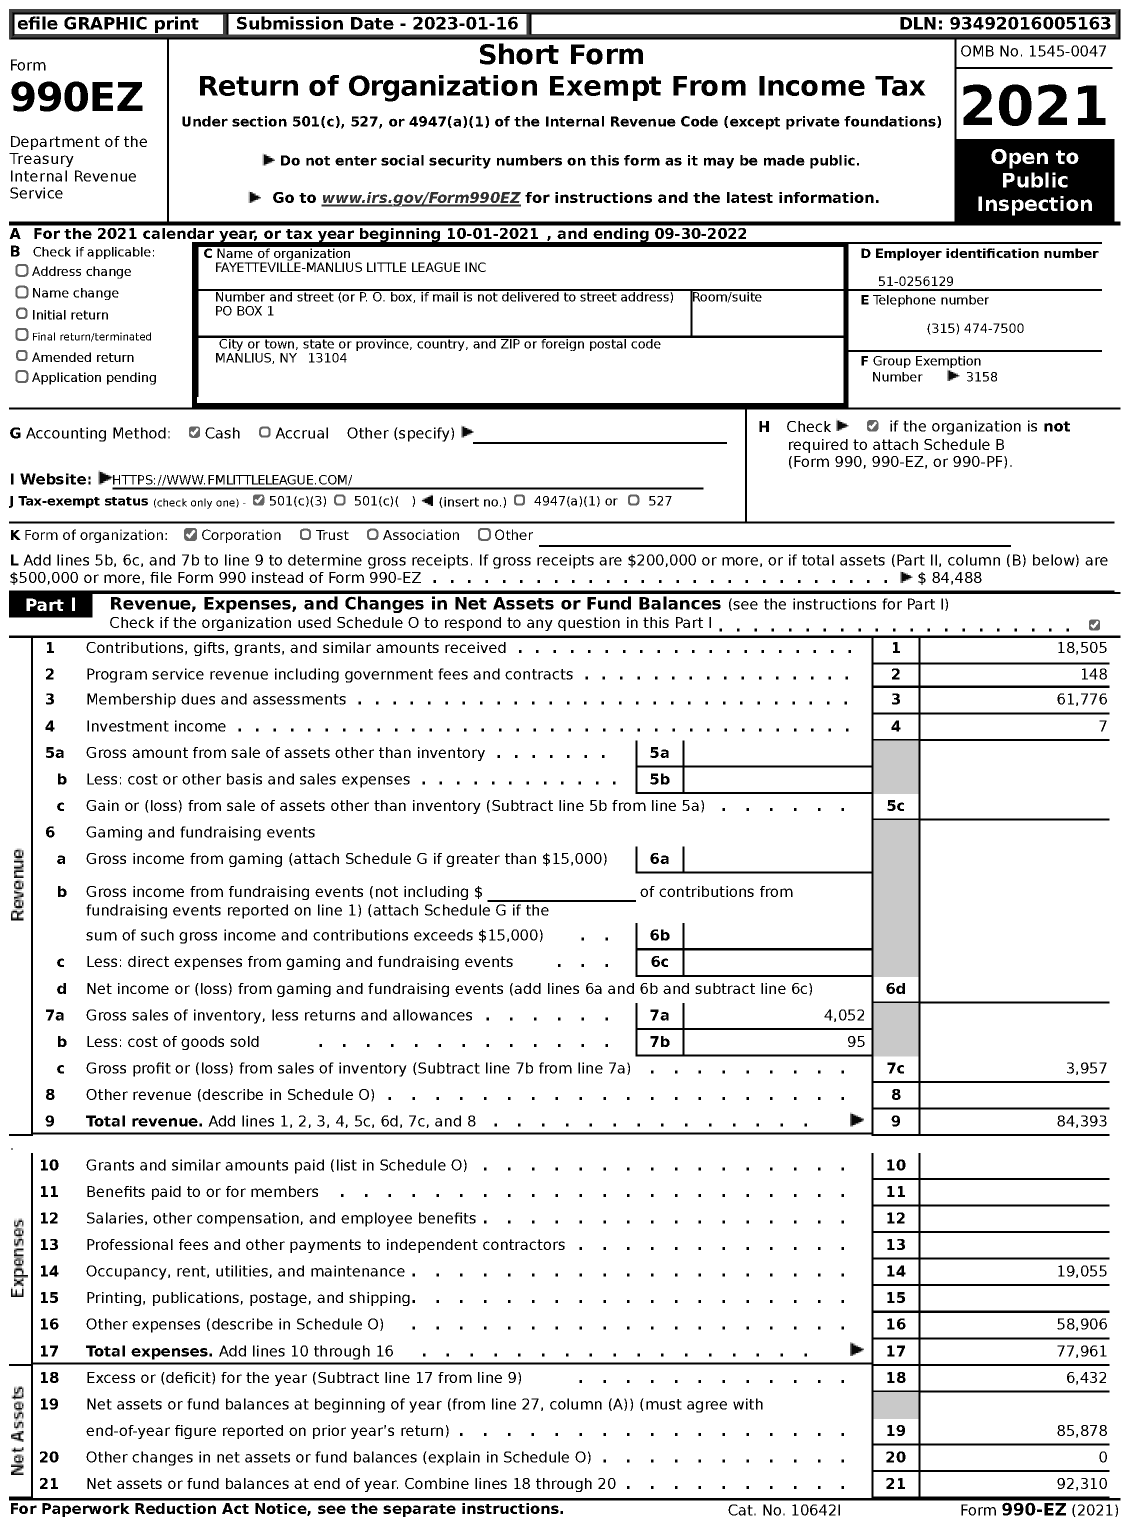 Image of first page of 2021 Form 990EZ for Little League Baseball - 2320807 Fayetteville Manlius LL